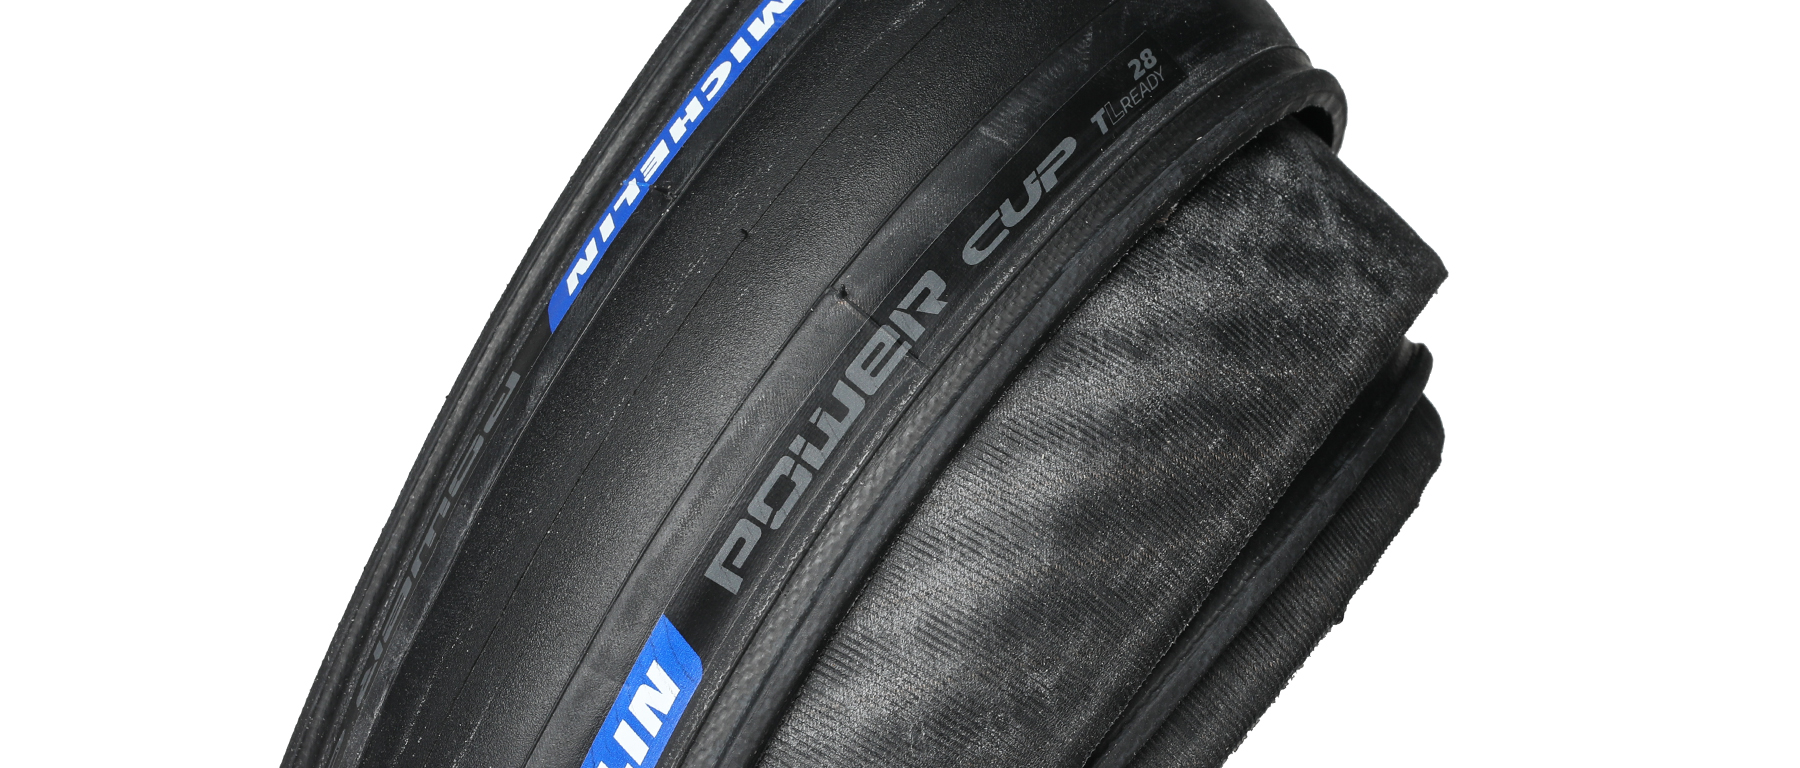 Michelin Power Cup TLR Road Tire Excel Sports | Shop Online From